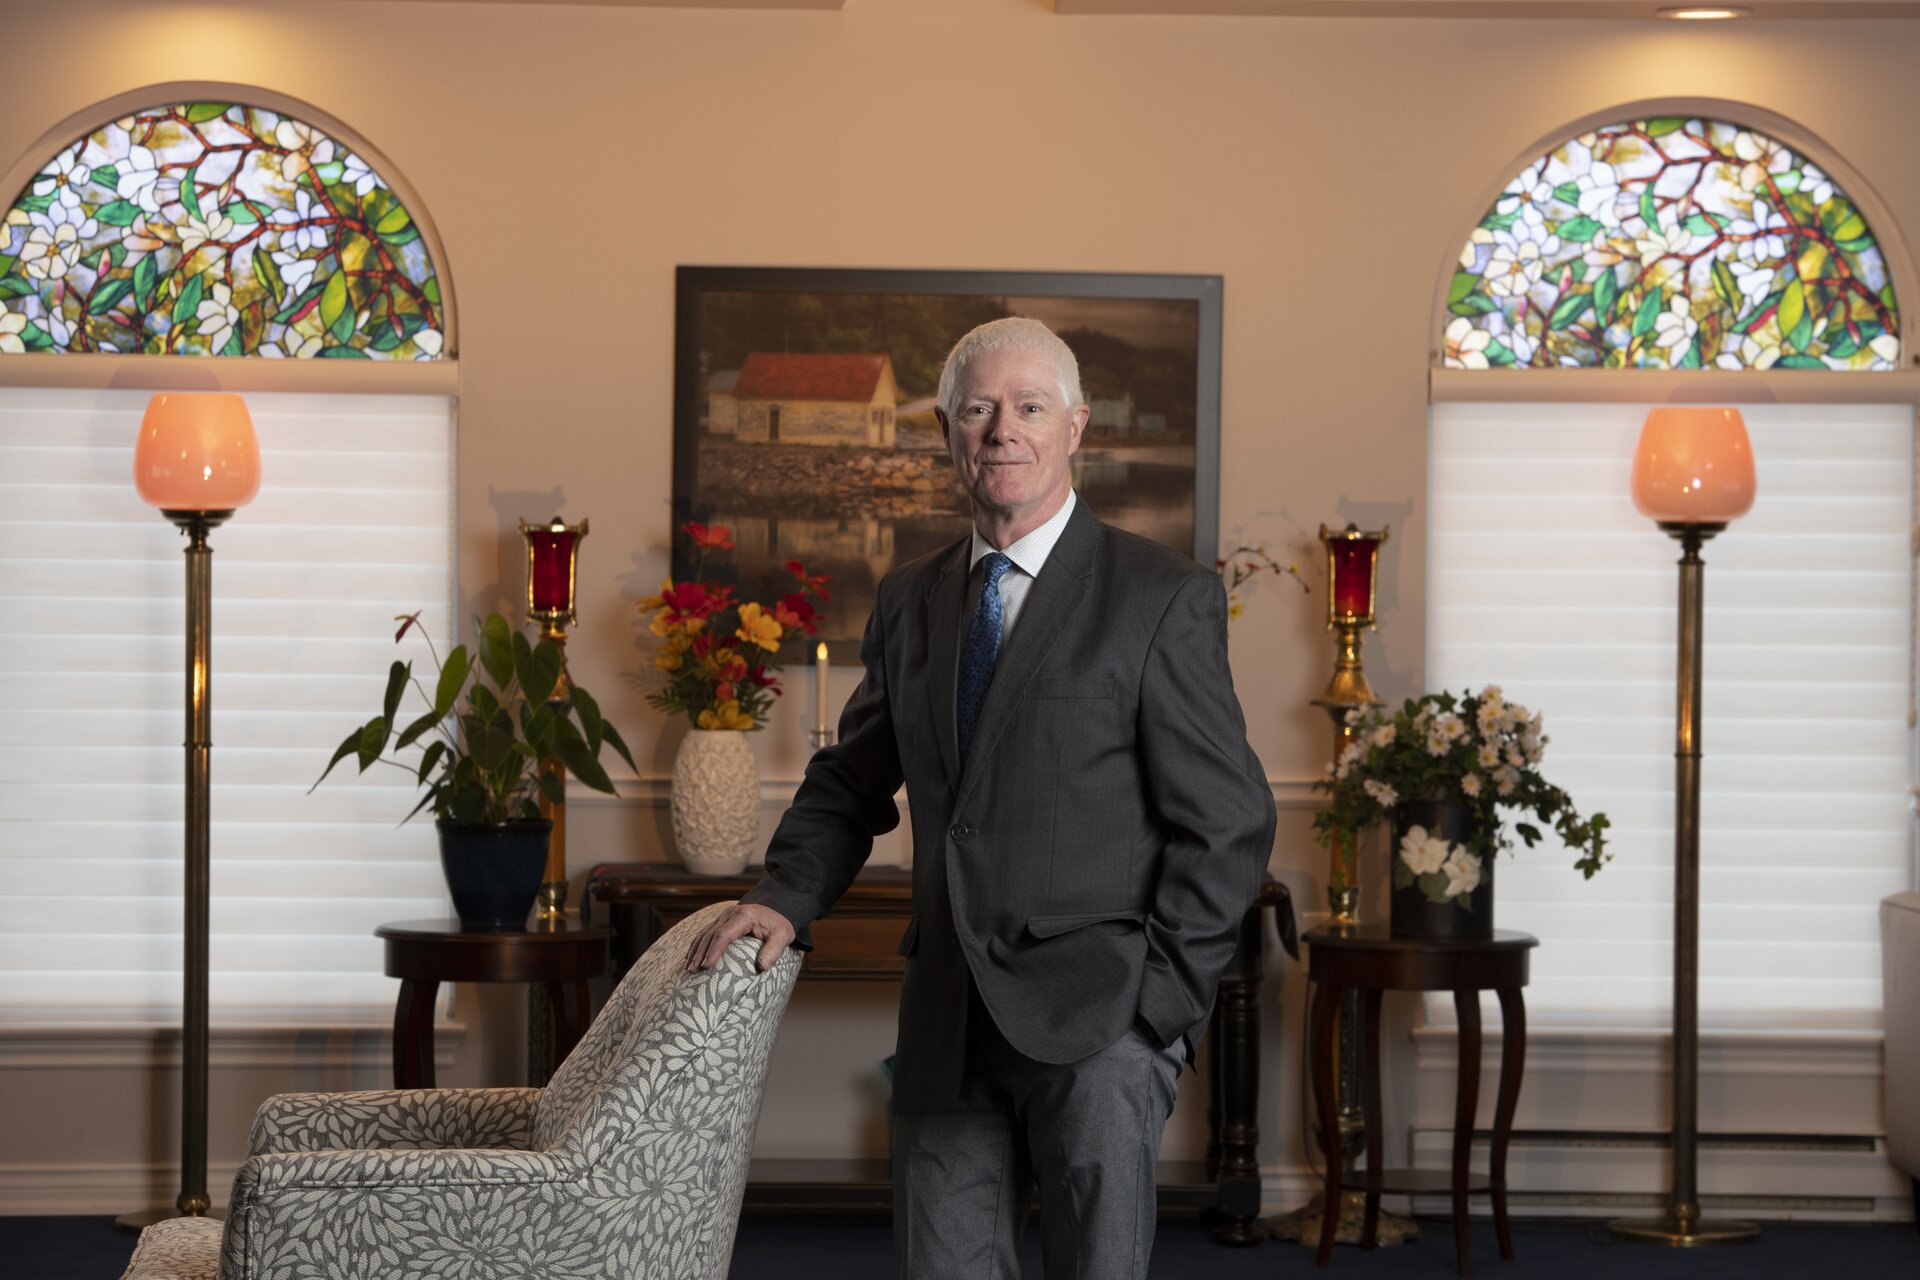 Donnie MacIsaac
Assistant Funeral Director